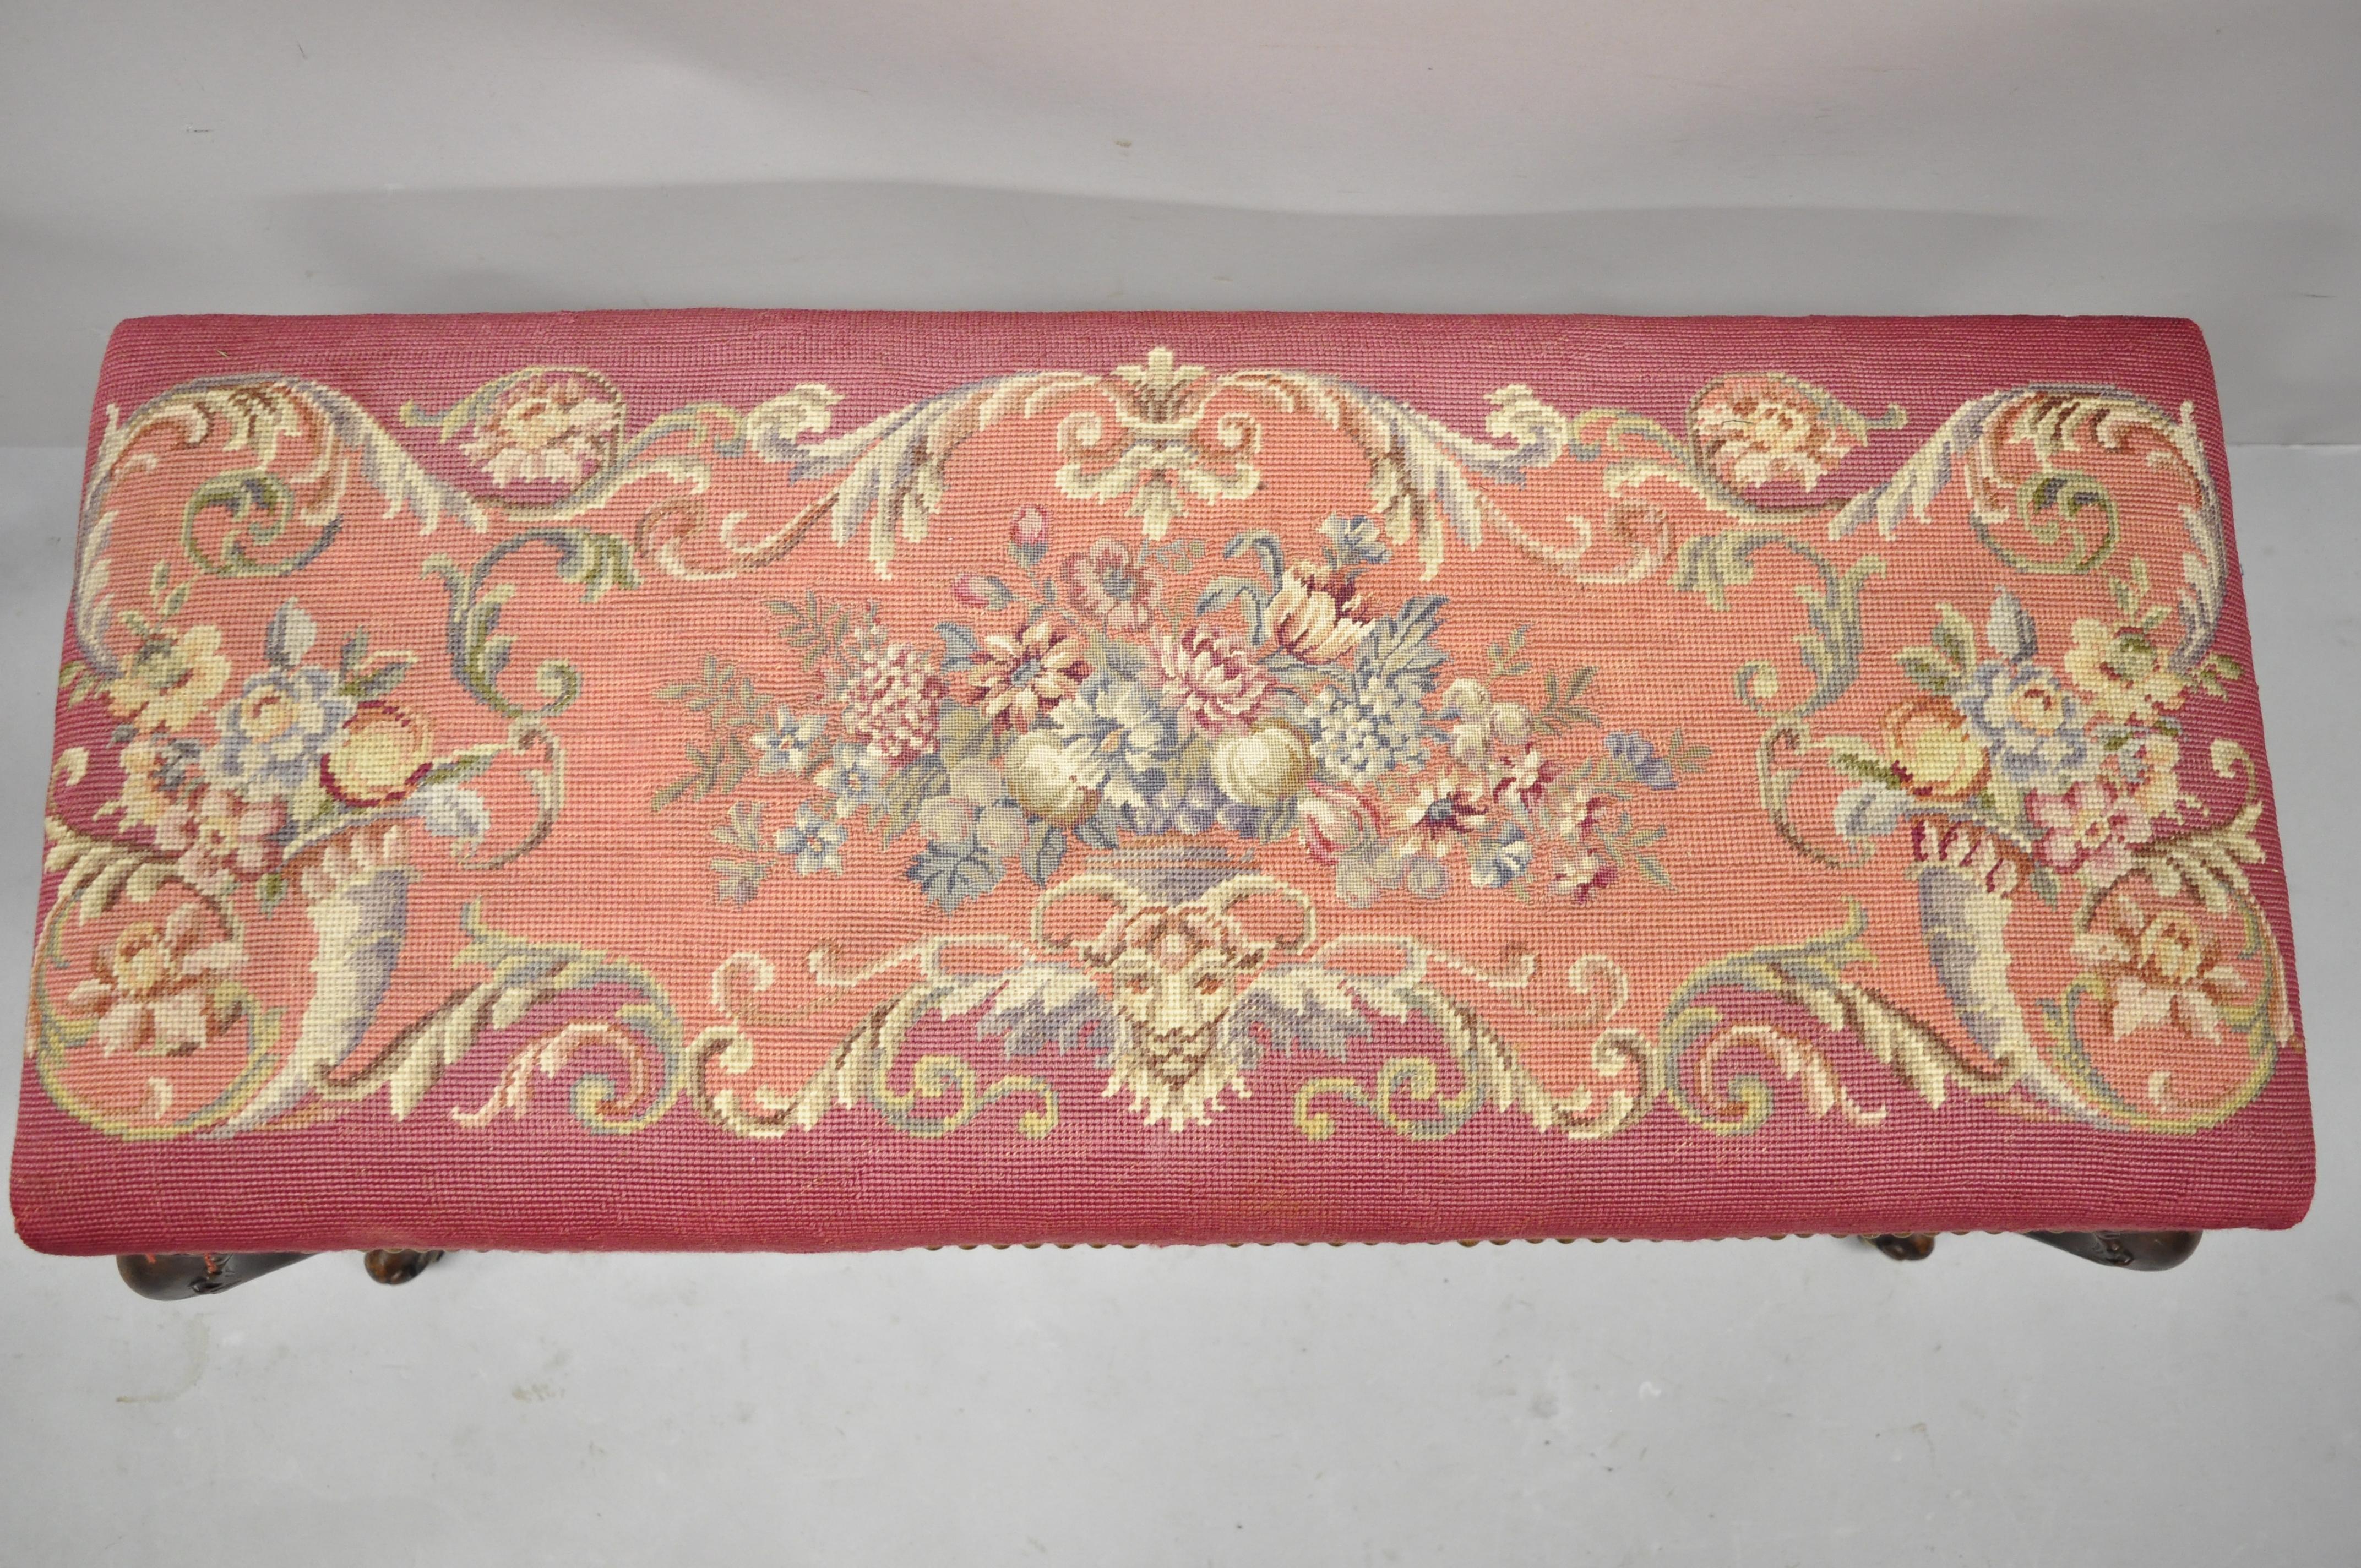 Antique French Victorian pink floral needlepoint mahogany cabriole leg bench. Item features pink floral needlepoint upholstery, solid wood frame, beautiful wood grain, cabriole legs, very nice antique item, quality American craftsmanship. Circa